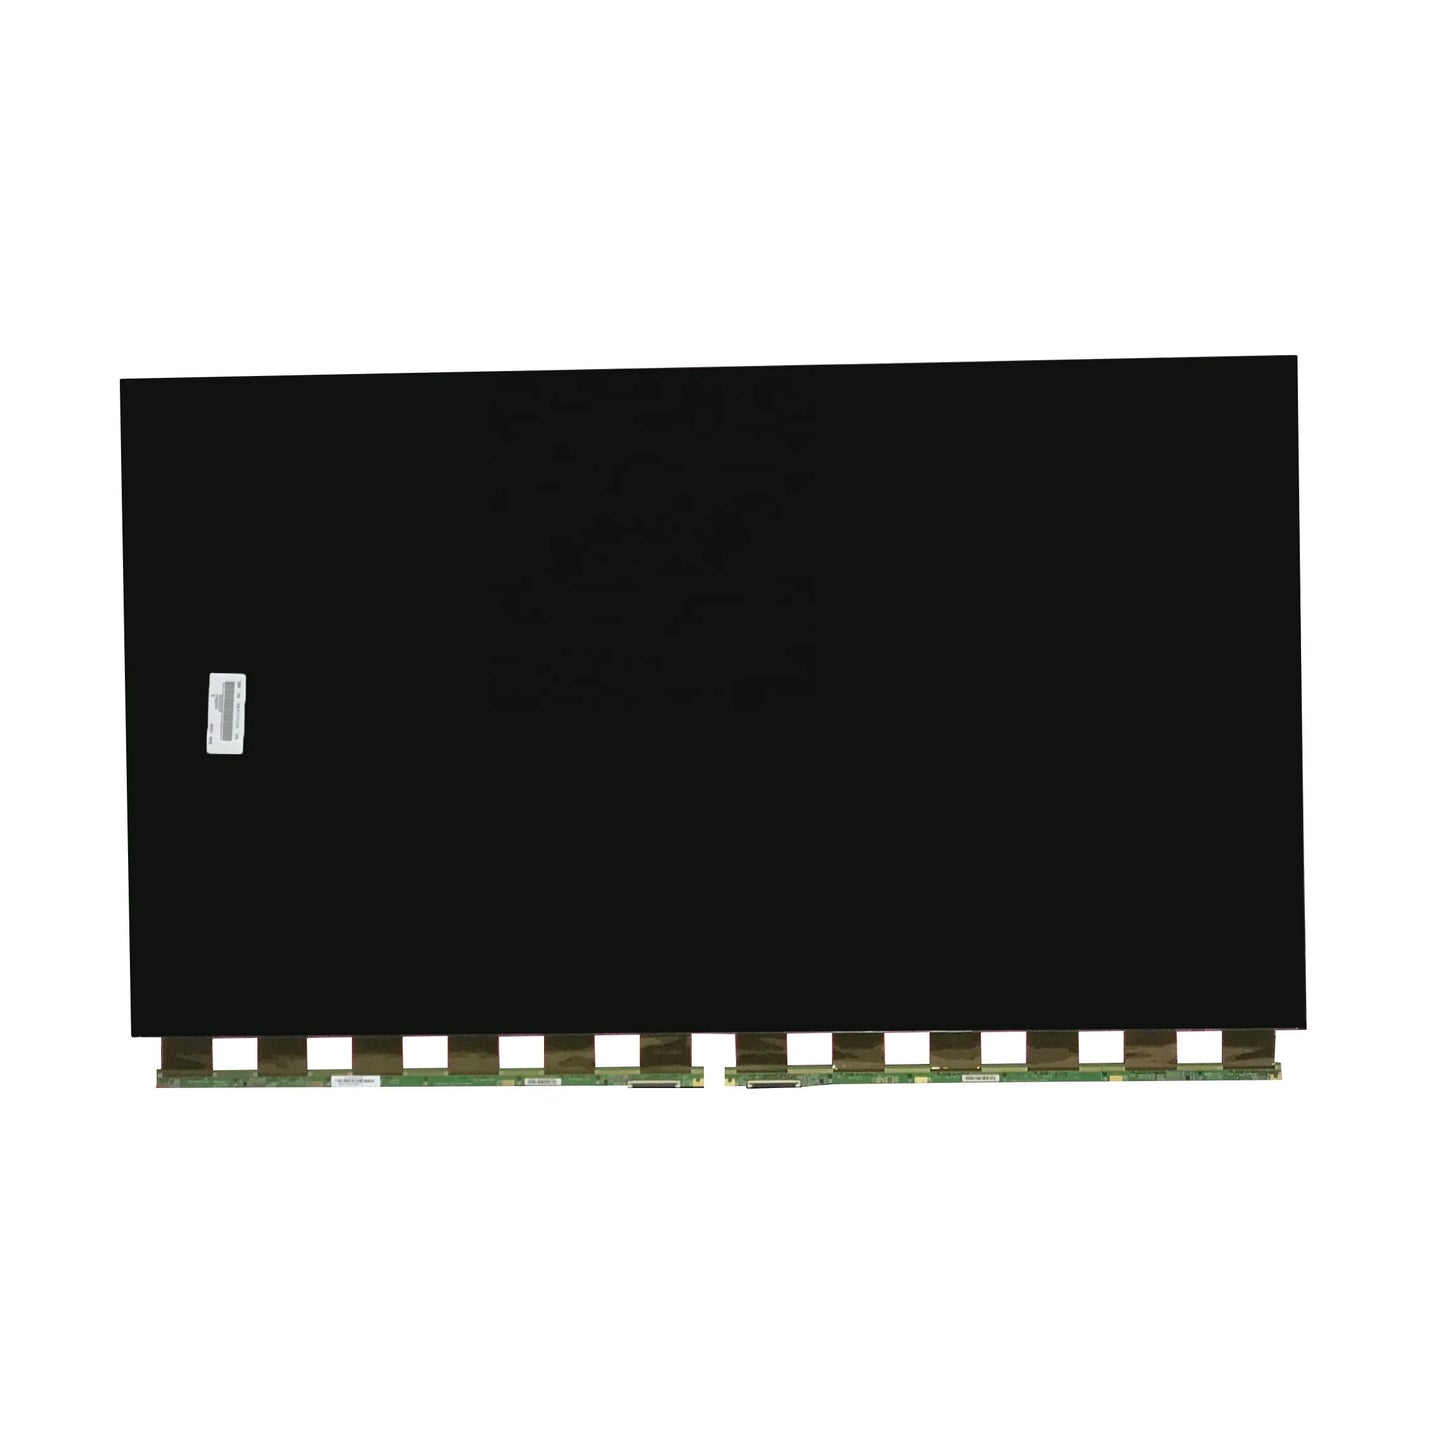 HV430QUB-N4E 51 pins BOE 43" inch LCD LED TFT Display Open Cell TV Screen Spare Panel Replacement Parts for TV Repair